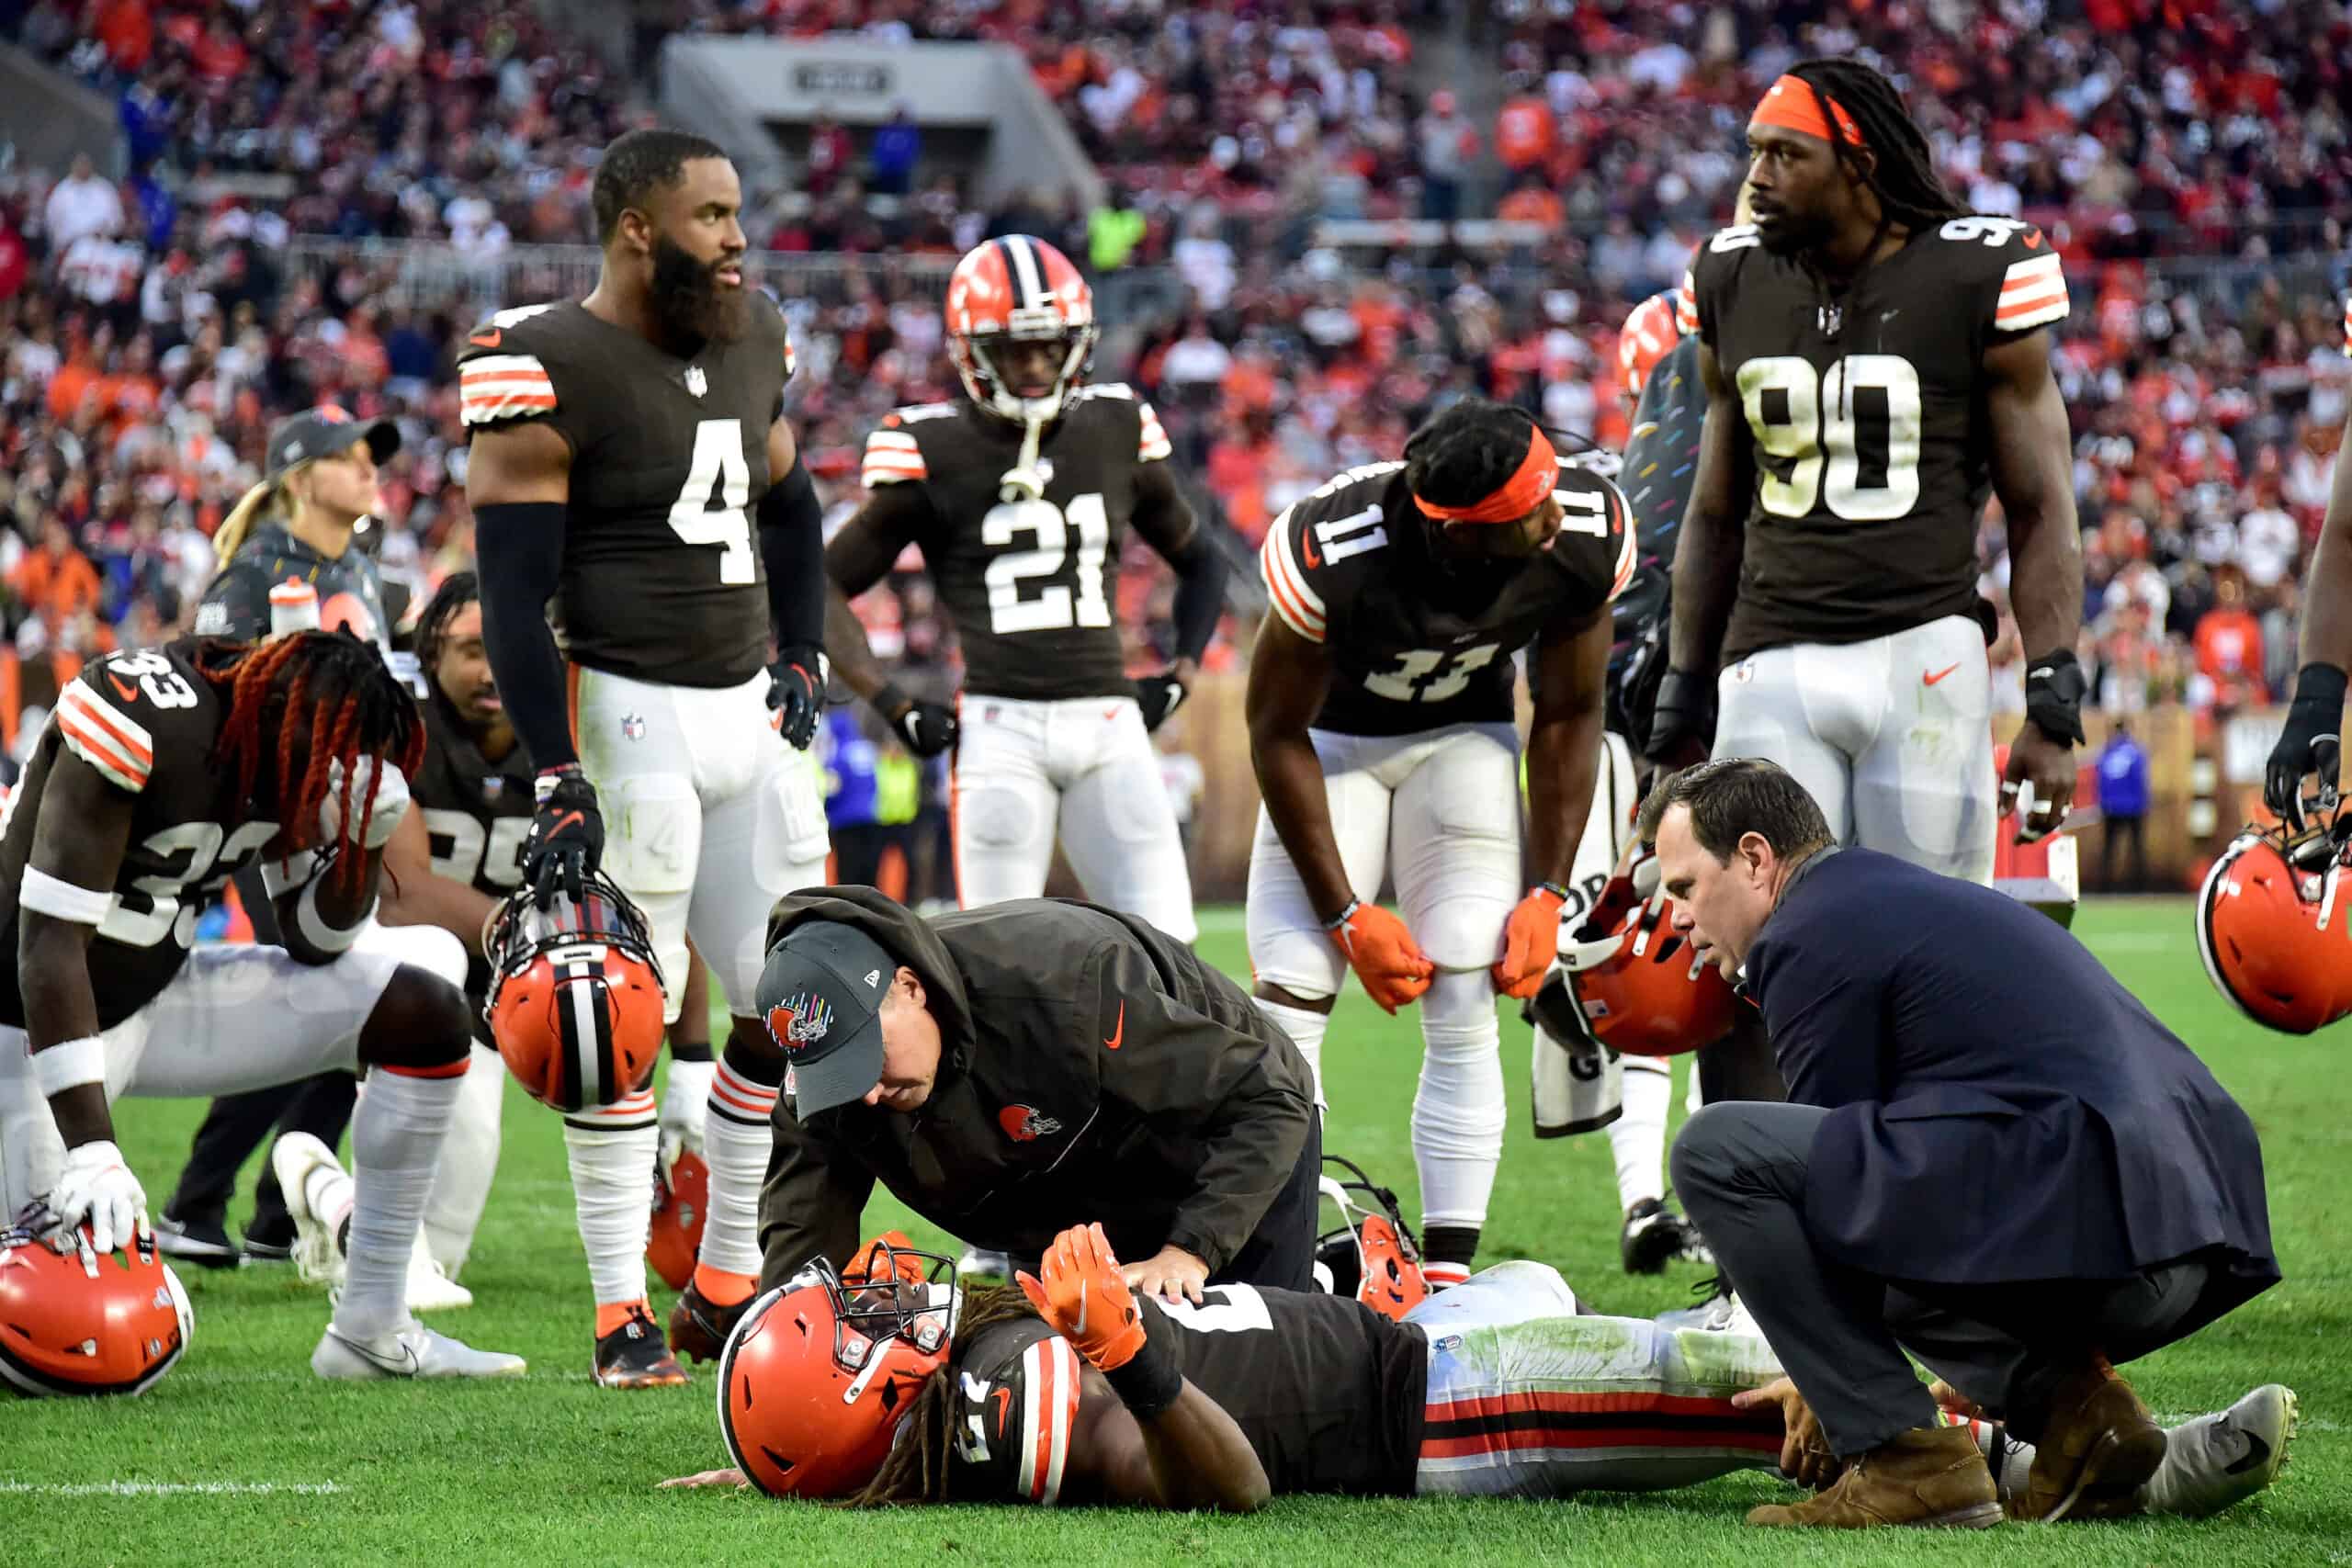 Kareem Hunt #27 of the Cleveland Browns is tended to by team medical personnel after an injury during the fourth quarter against the Arizona Cardinals at FirstEnergy Stadium on October 17, 2021 in Cleveland, Ohio. 